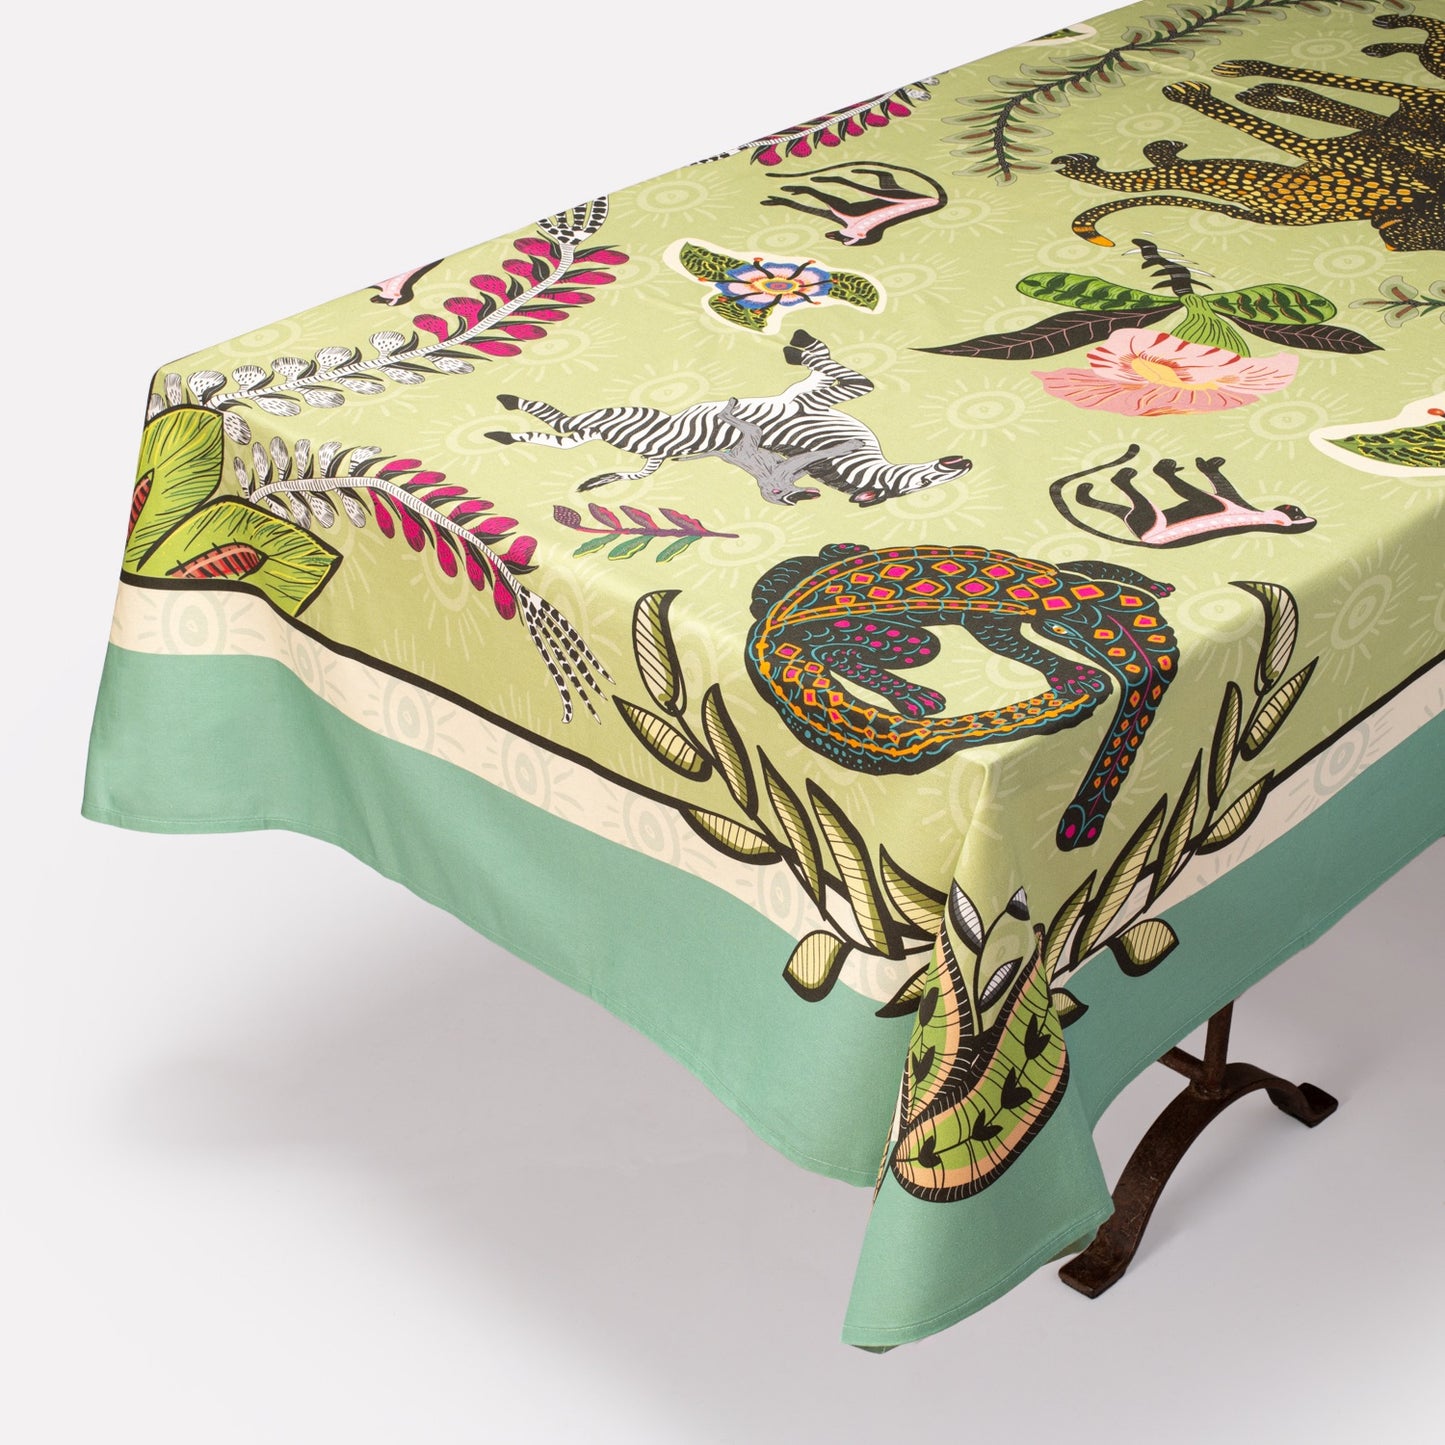 Royal Leopard Tablecloth in Delta